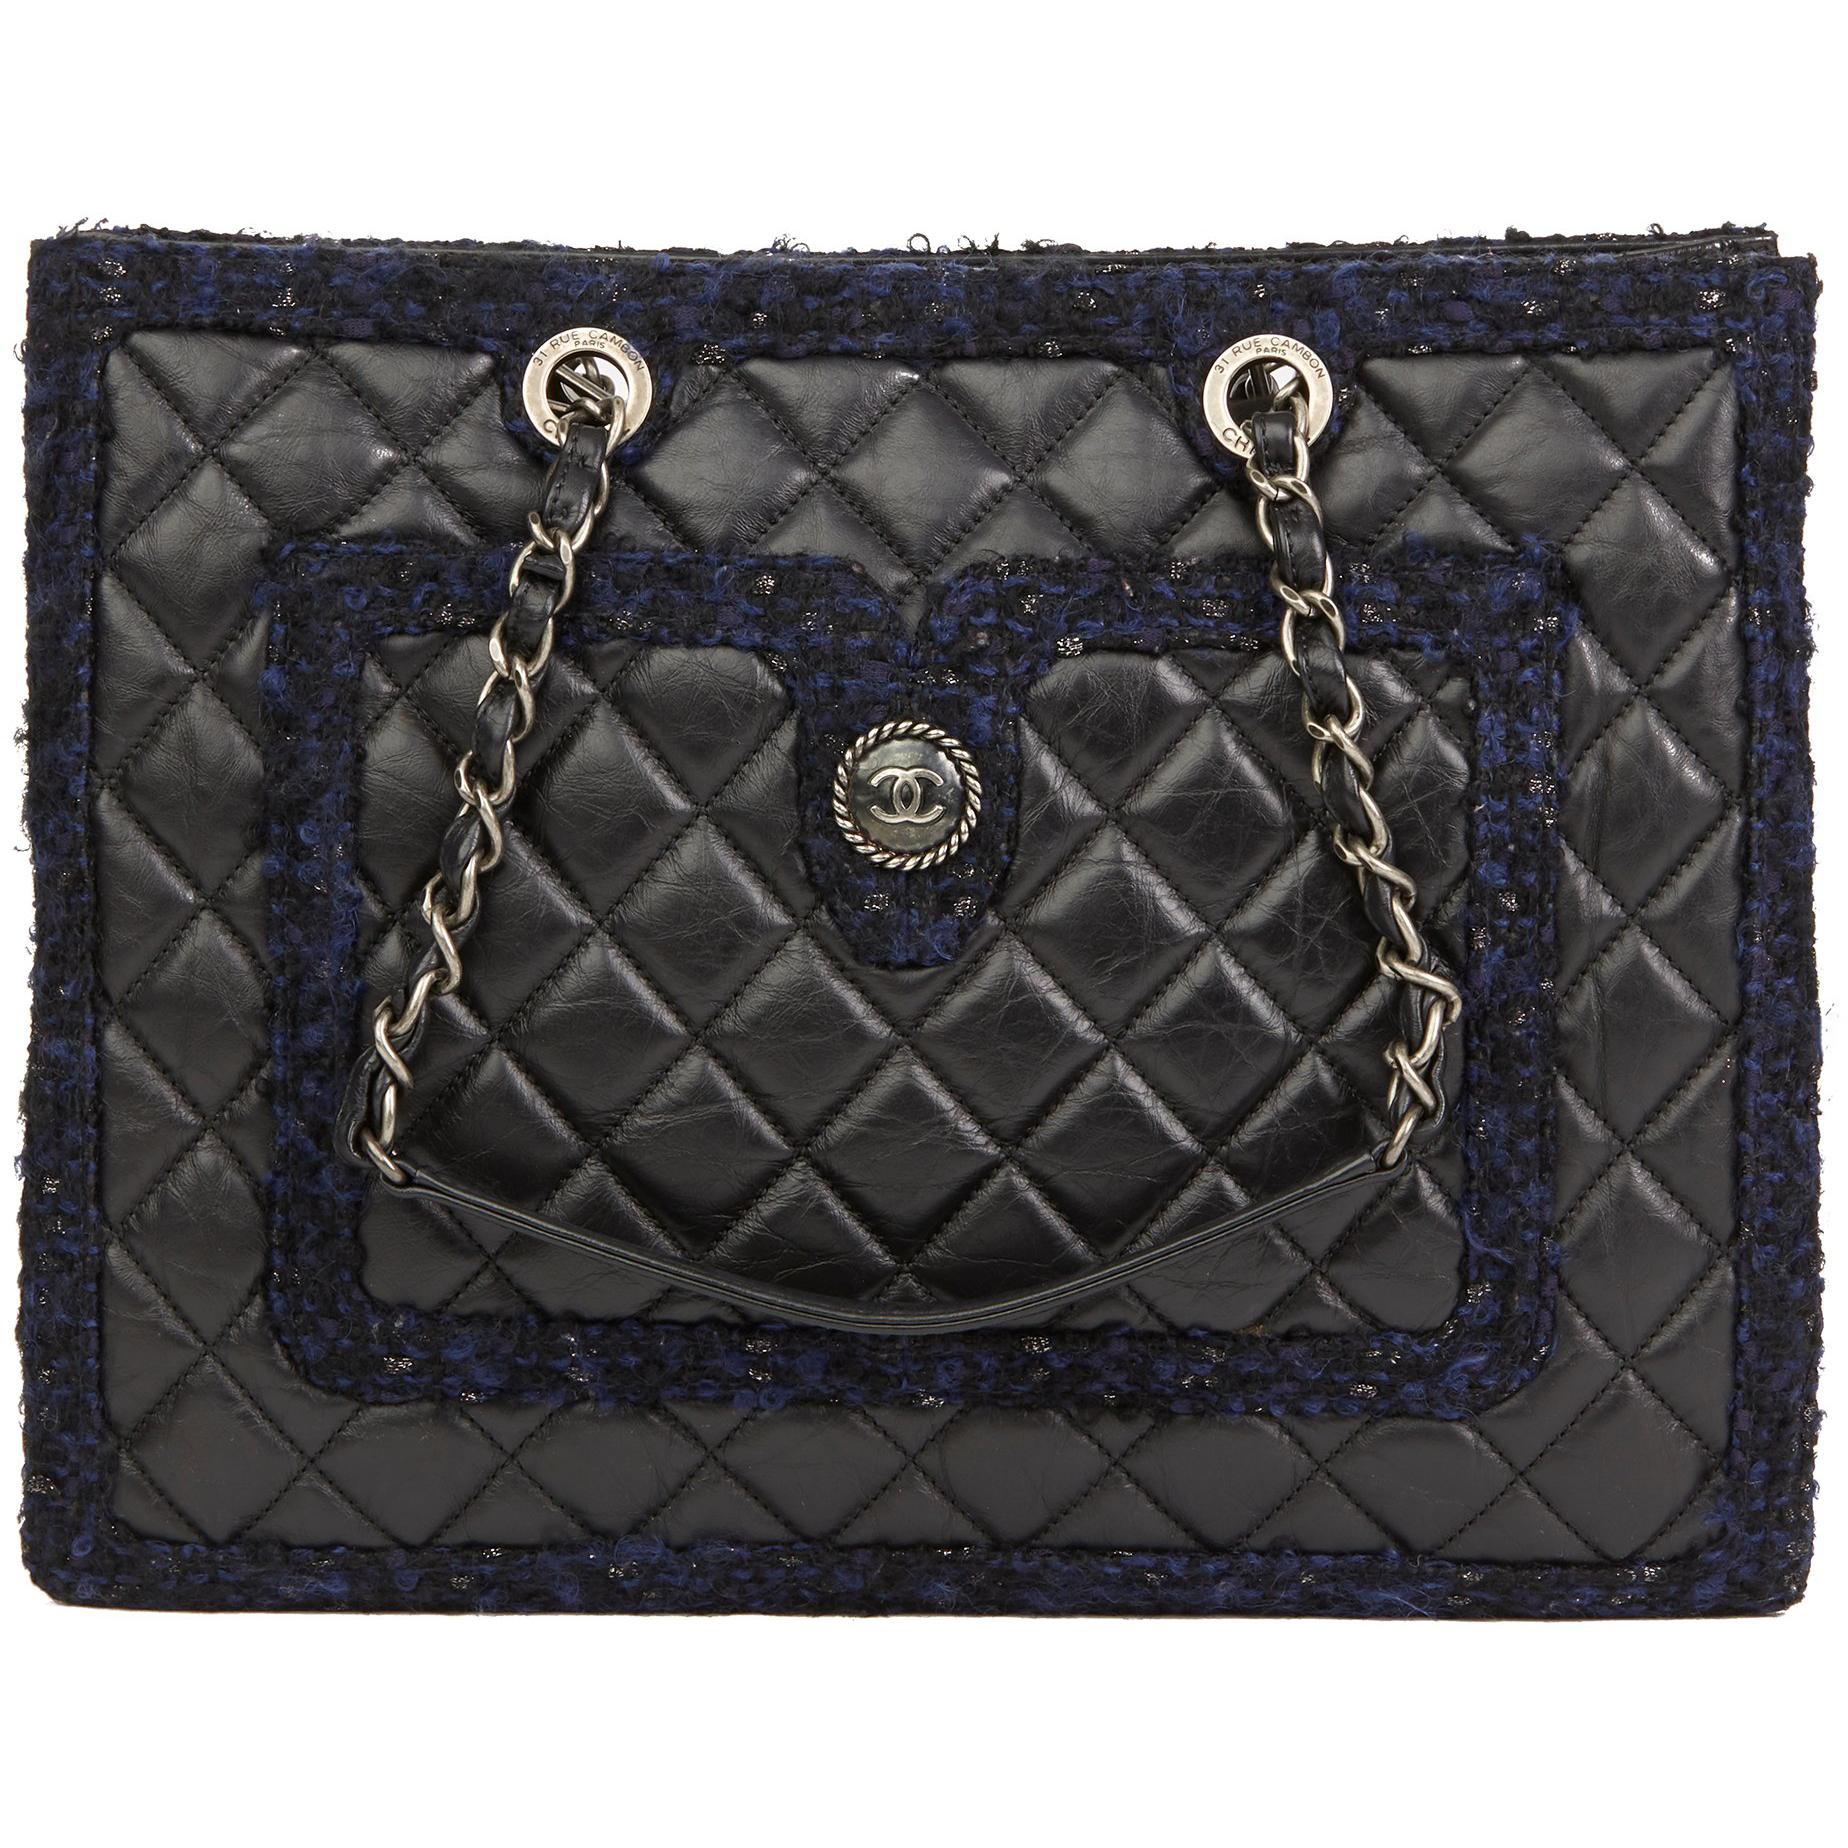 2015 Chanel Black Quilted Aged Quilted Calfskin & Navy Tweed Grand Shopping Tote